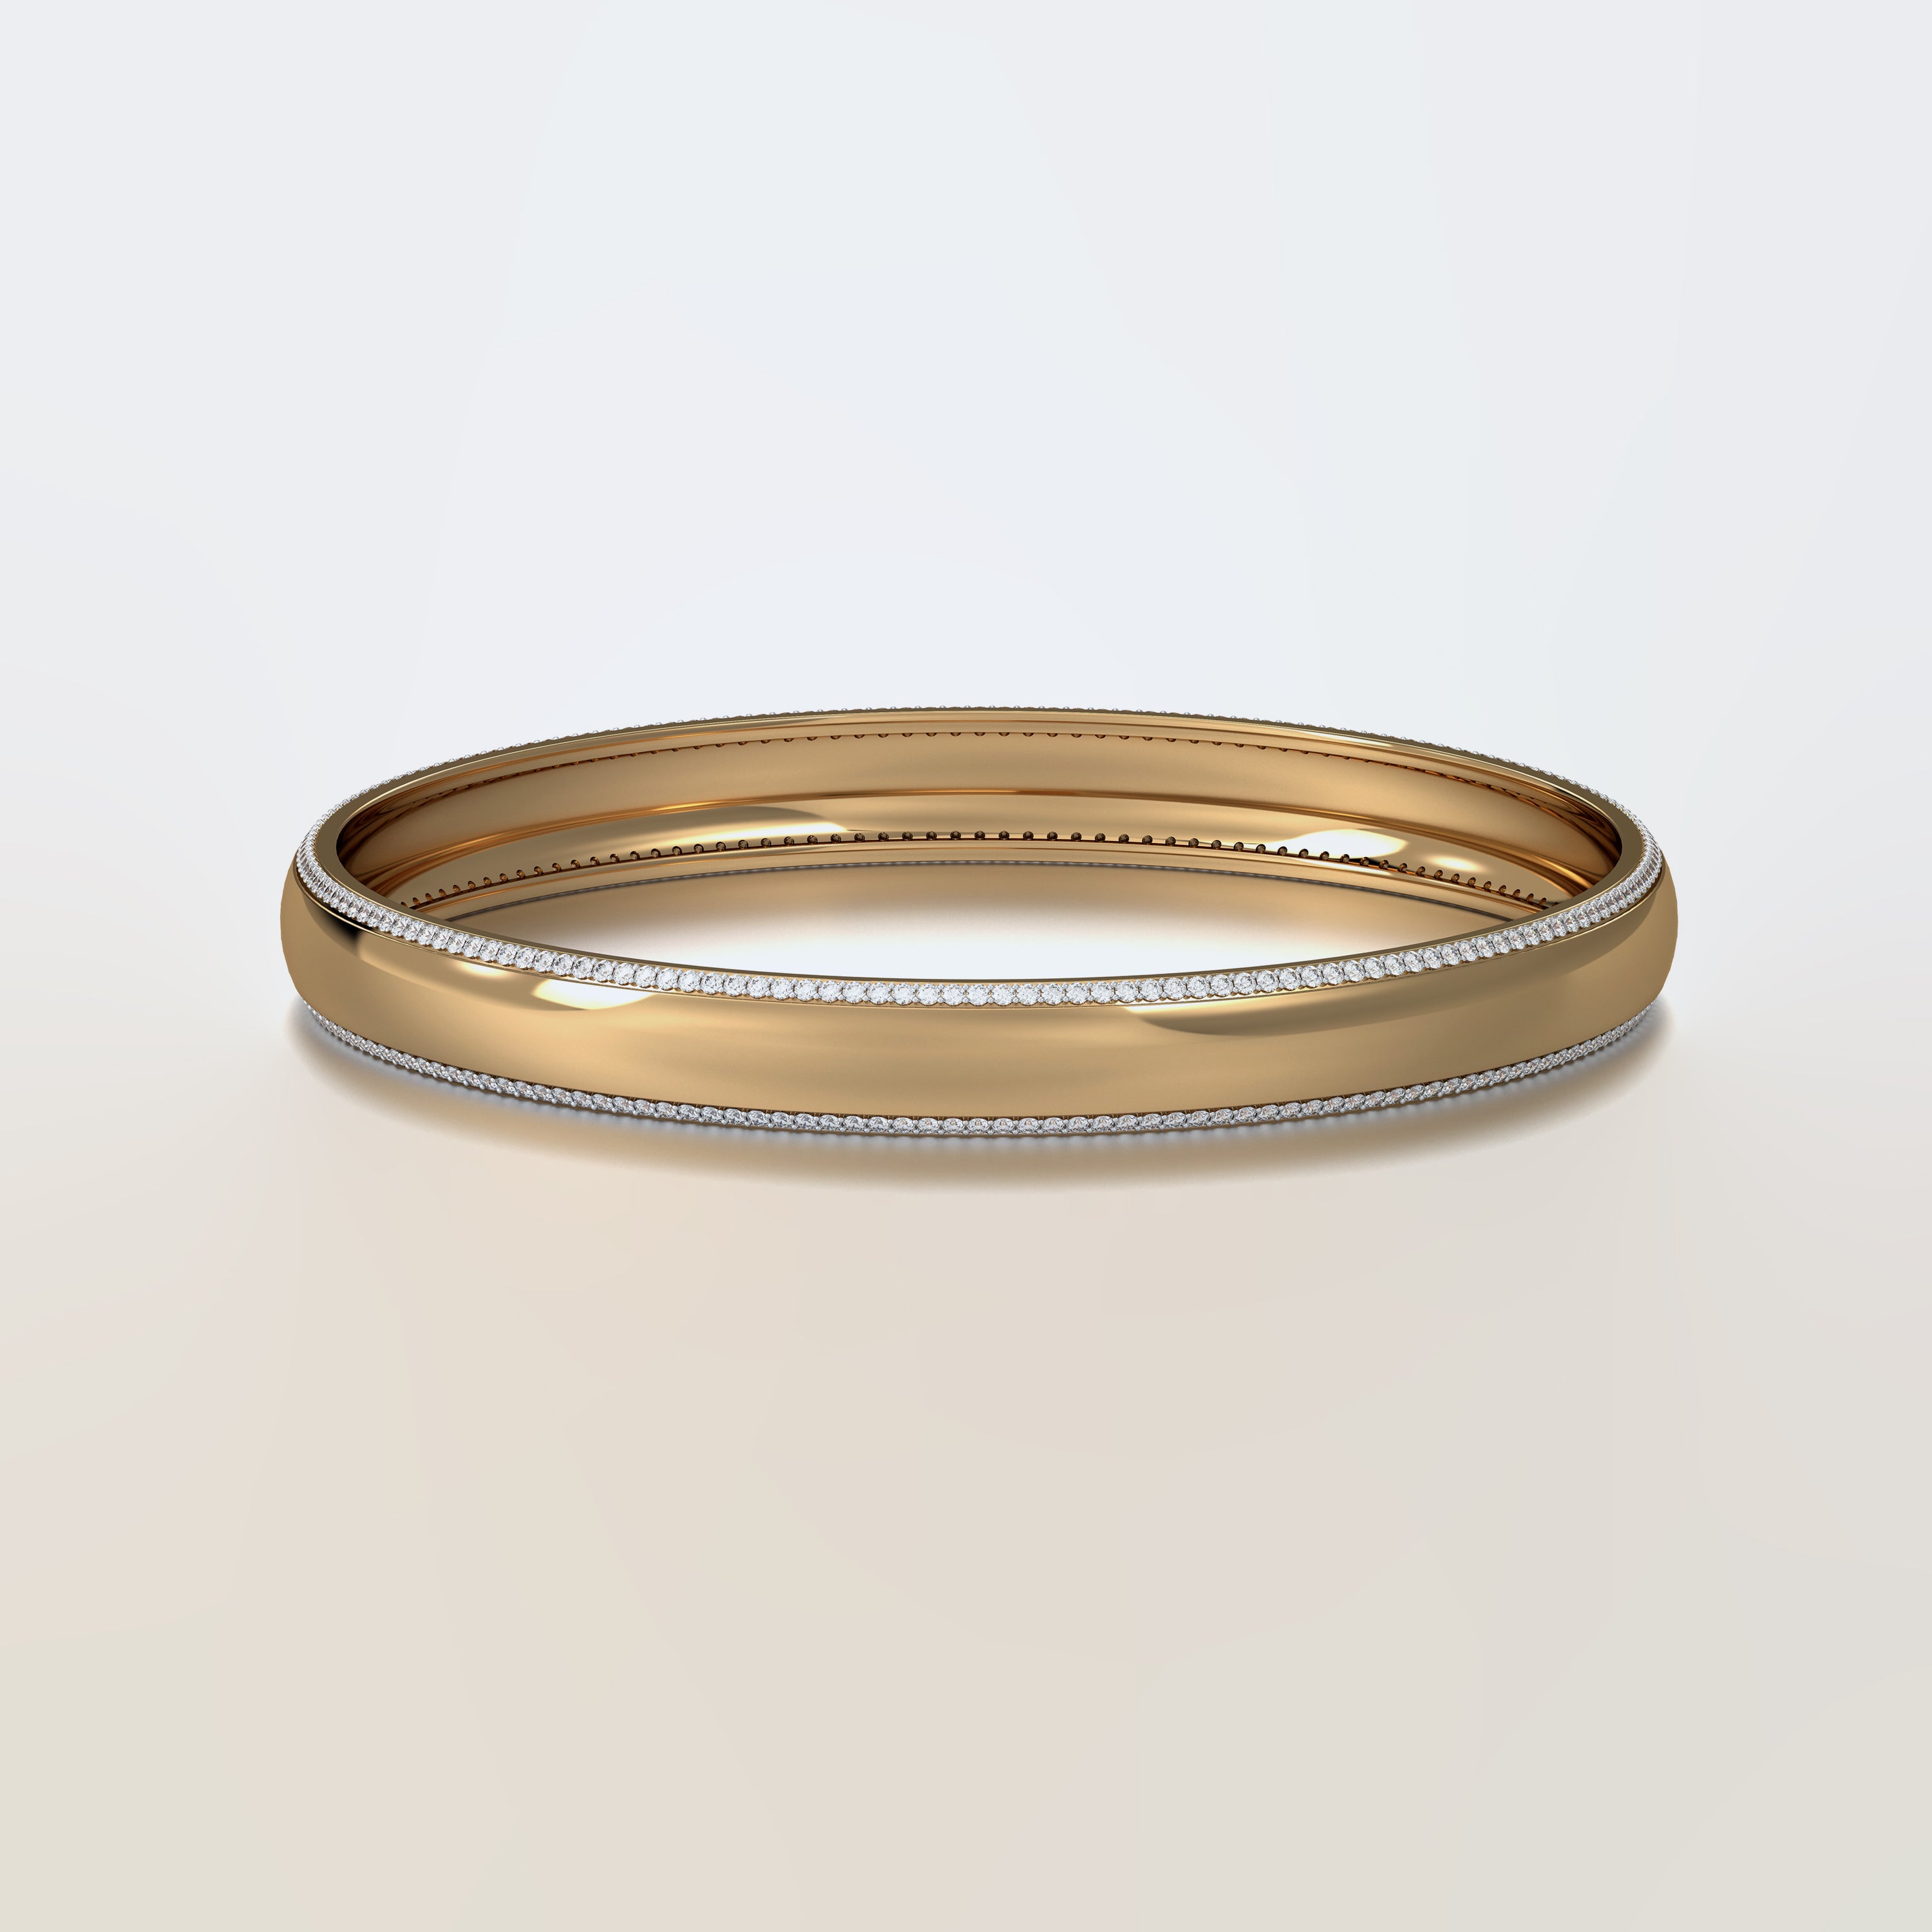 Aurm Broad Curved Bangle with Diamond Lining Large